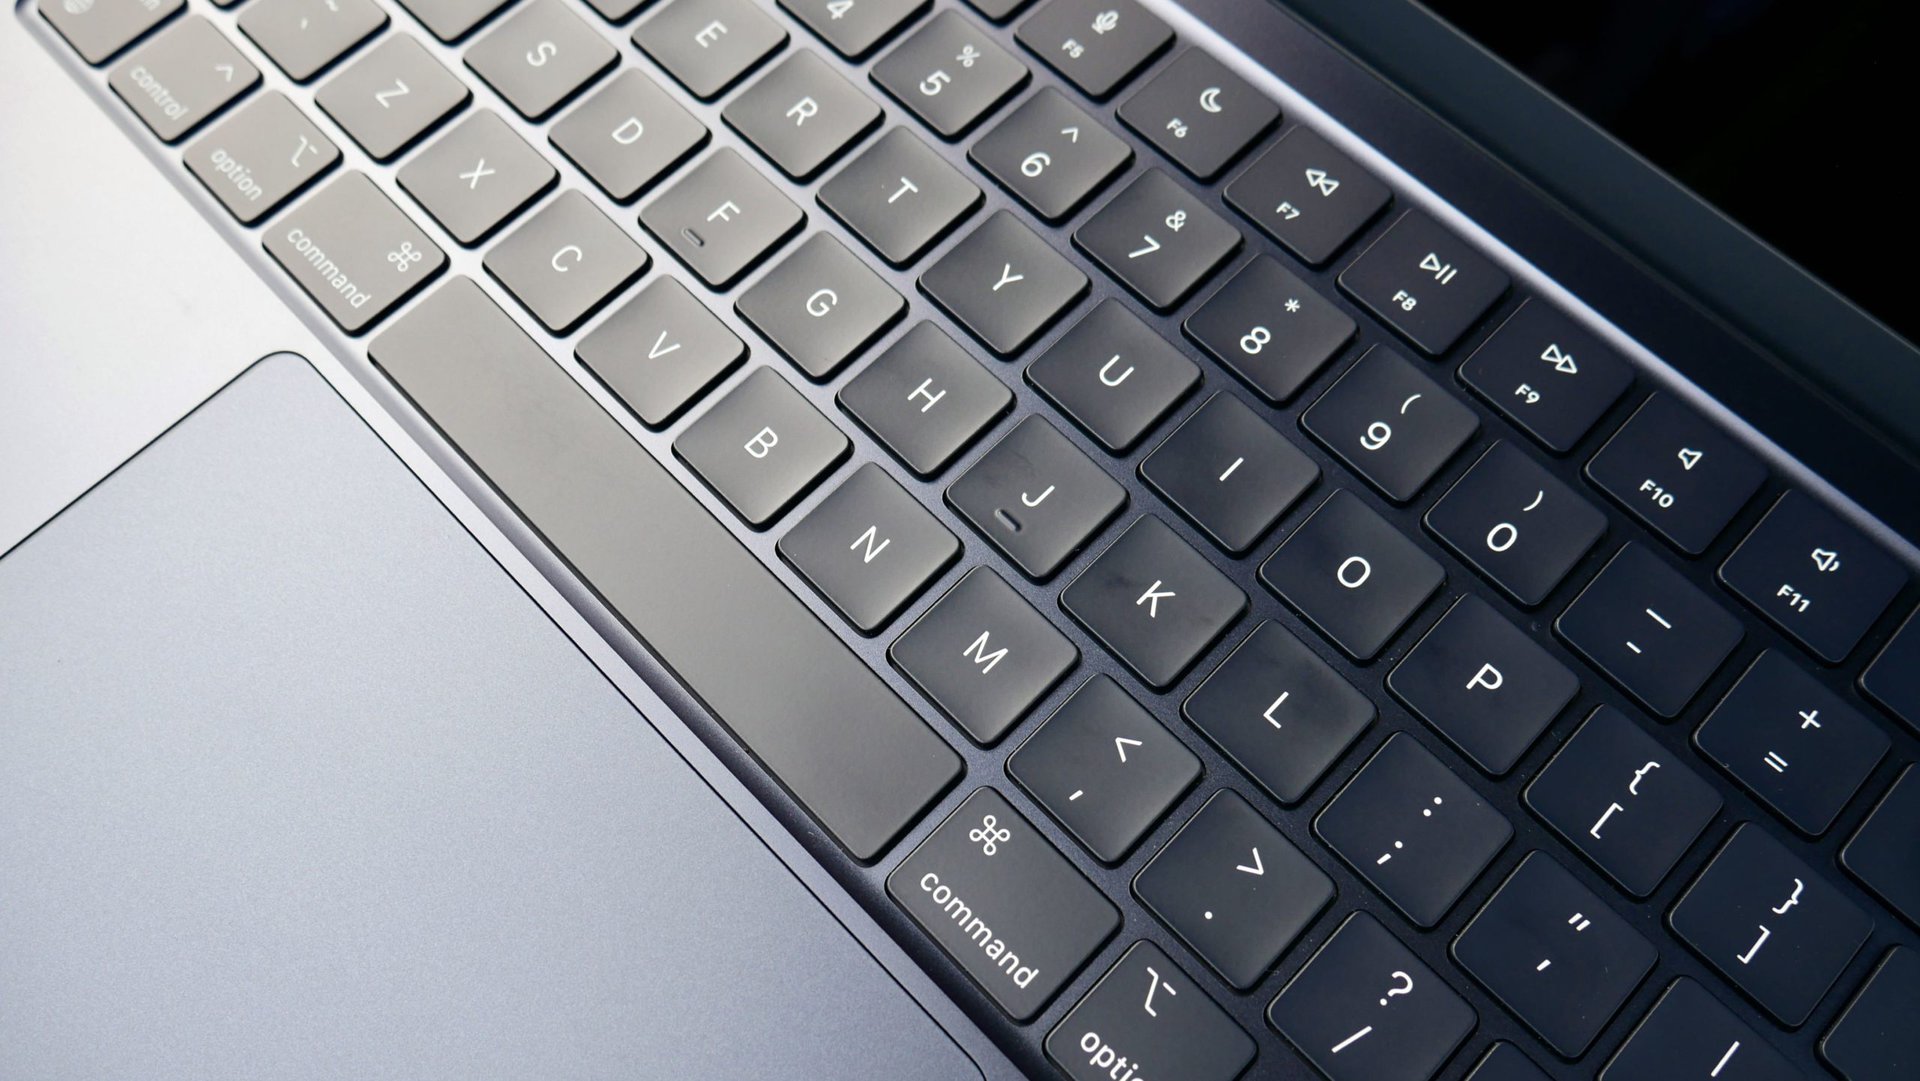 Apple will finally pay for broken keyboards on MacBooks